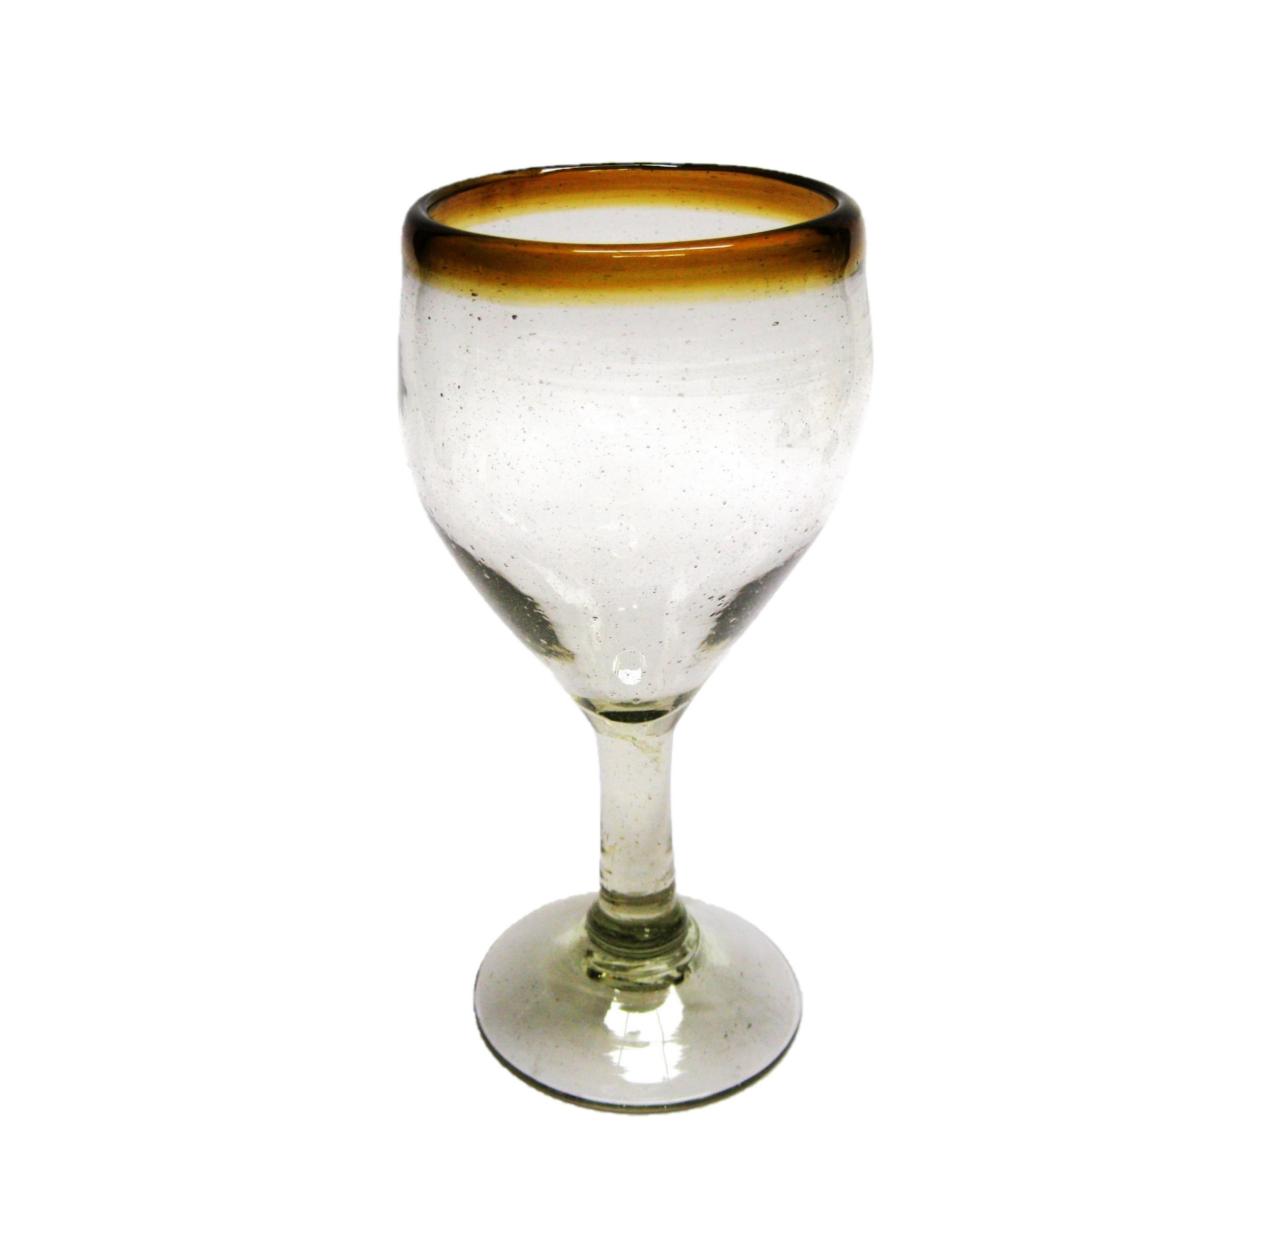 Wholesale MEXICAN GLASSWARE / Amber Rim 7 oz Small Wine Glasses  / Capture the bouquet of fine red wine with these wine glasses bordered with a bright, amber color rim.